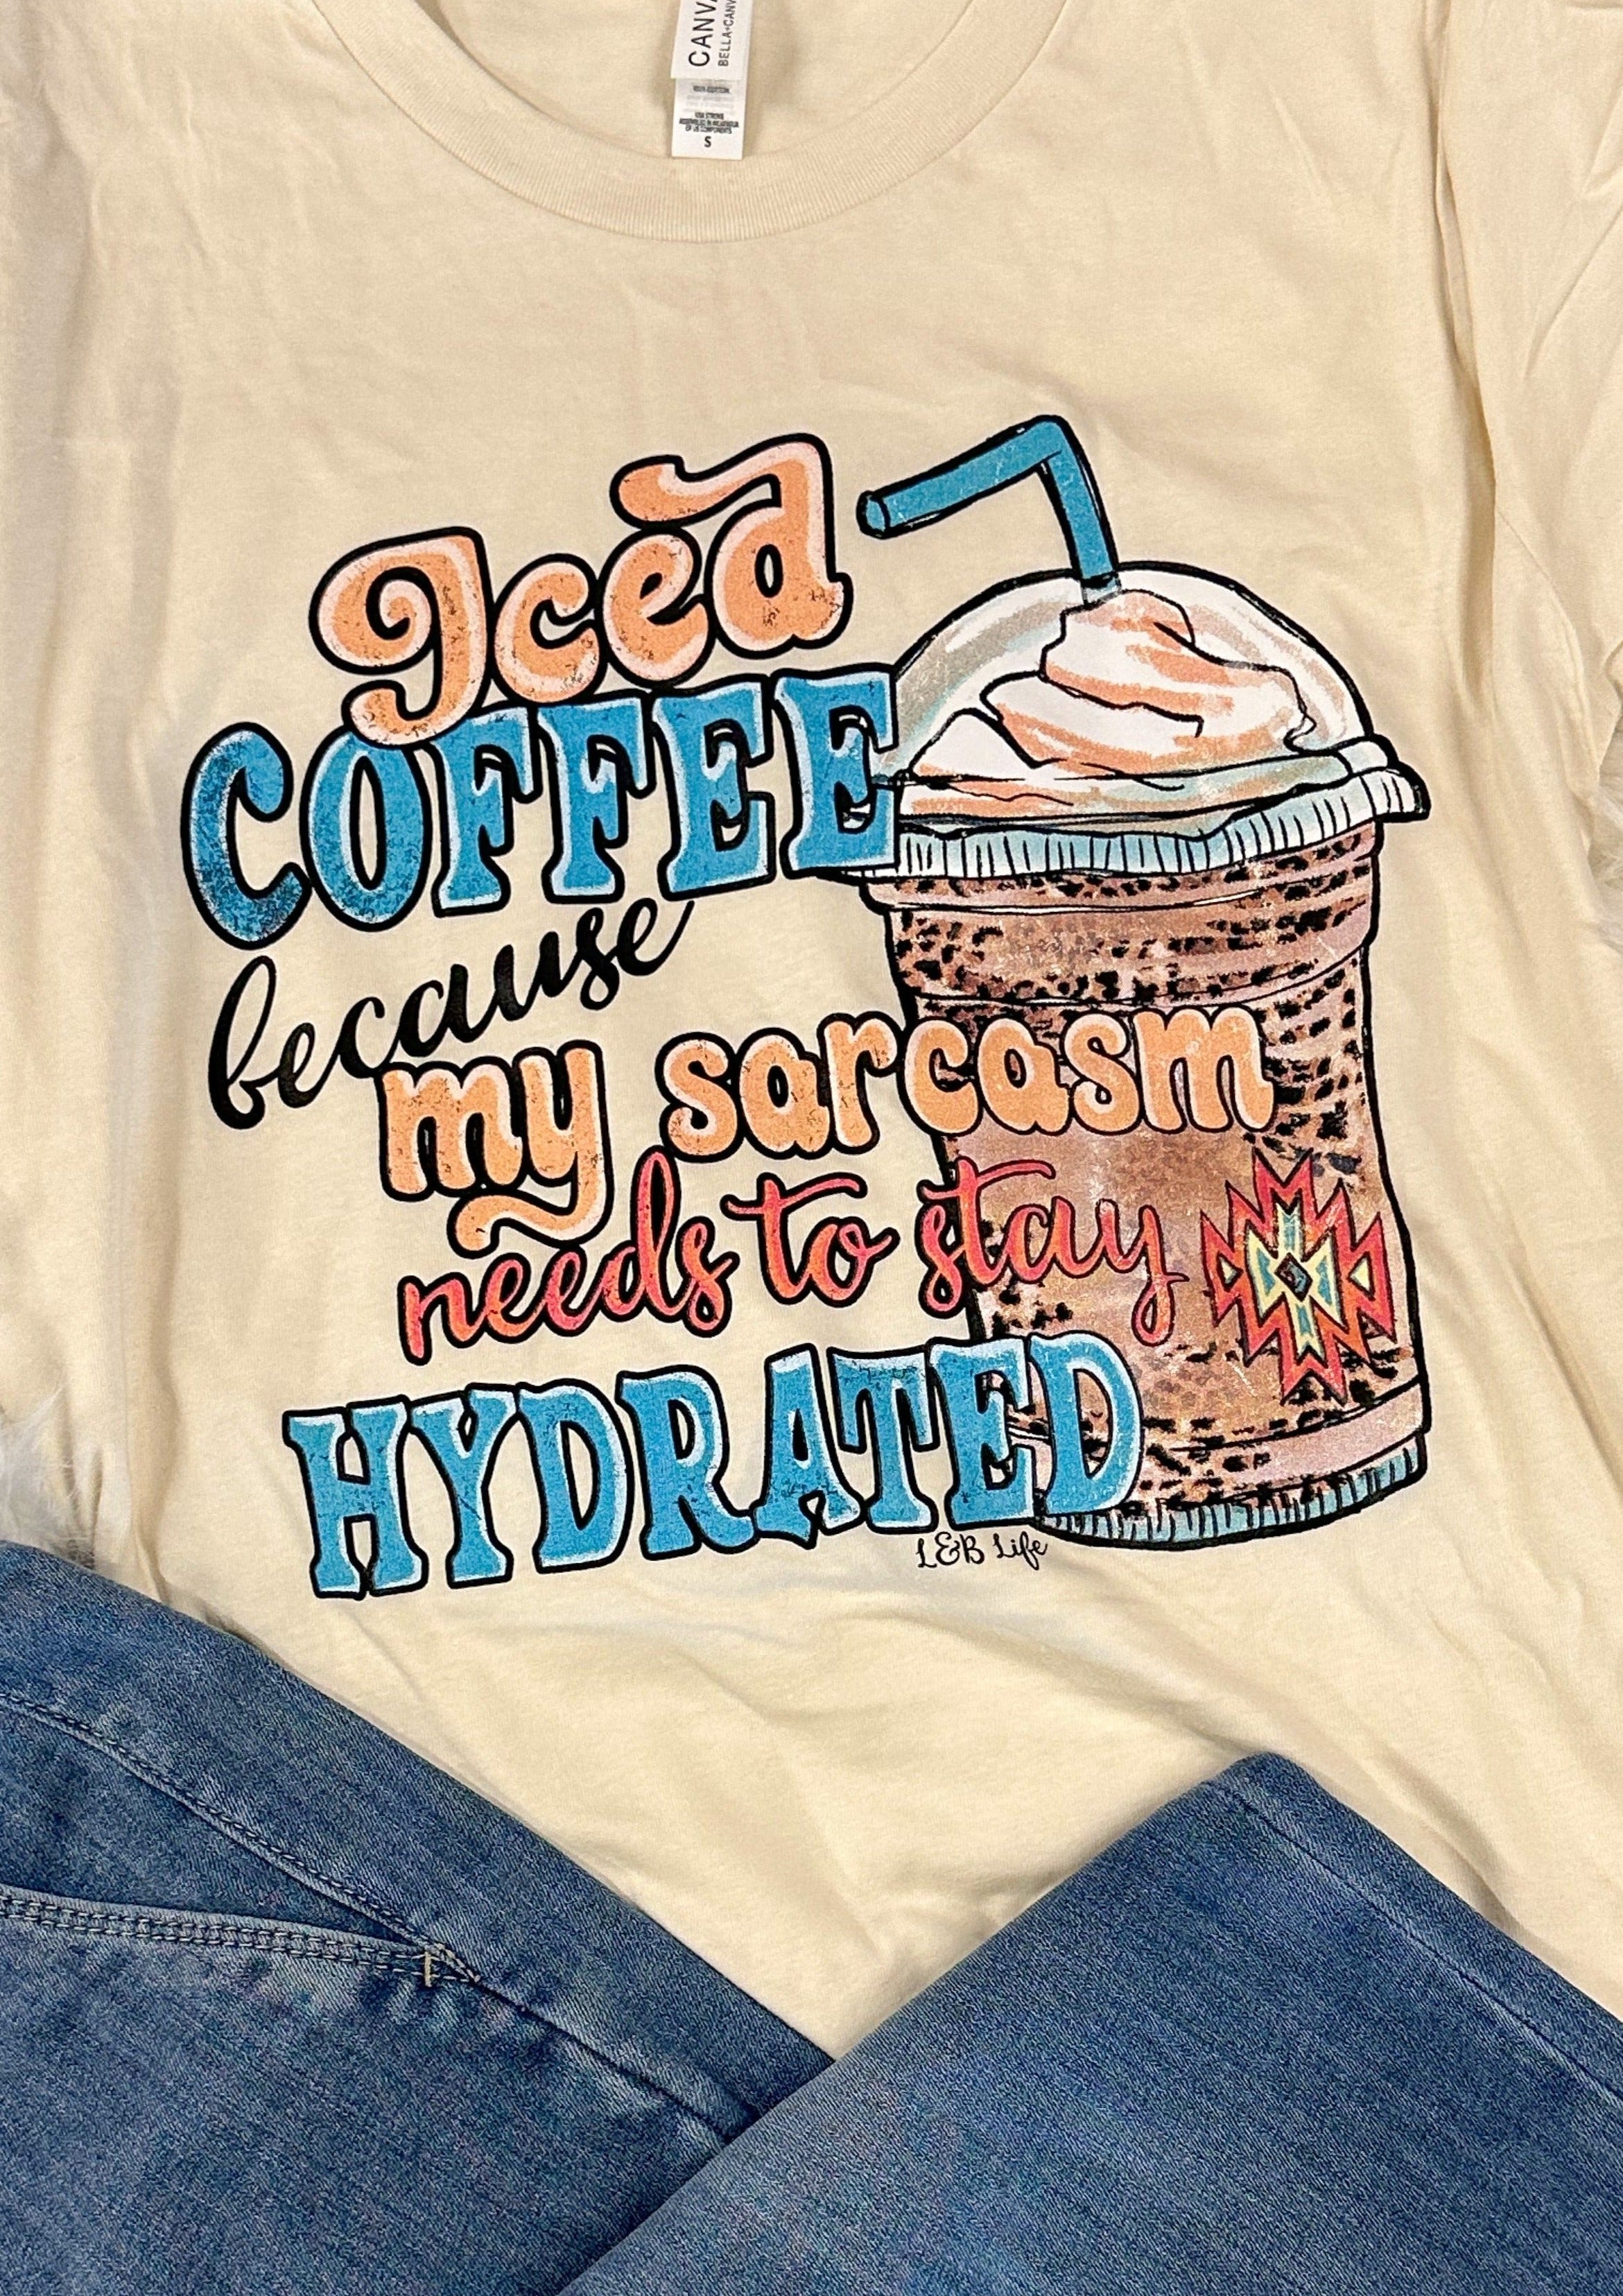 Iced Coffee Because My Sarcasm need to stay hydrated Tee Shirt - Cream color tee with multi colored graphic on the front